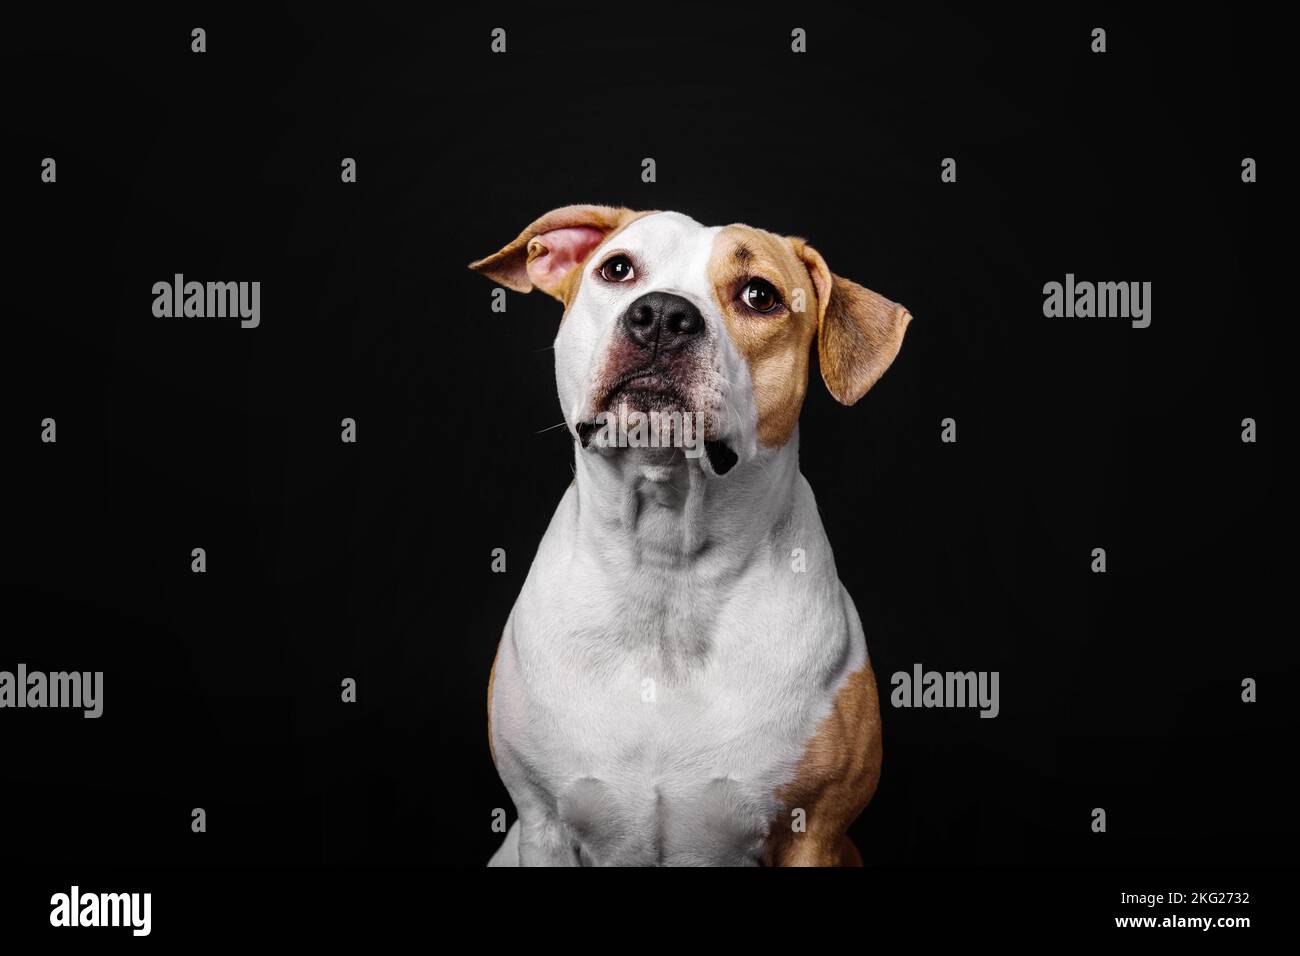 American Staffordshire Terrier dog isolated on black background Stock Photo